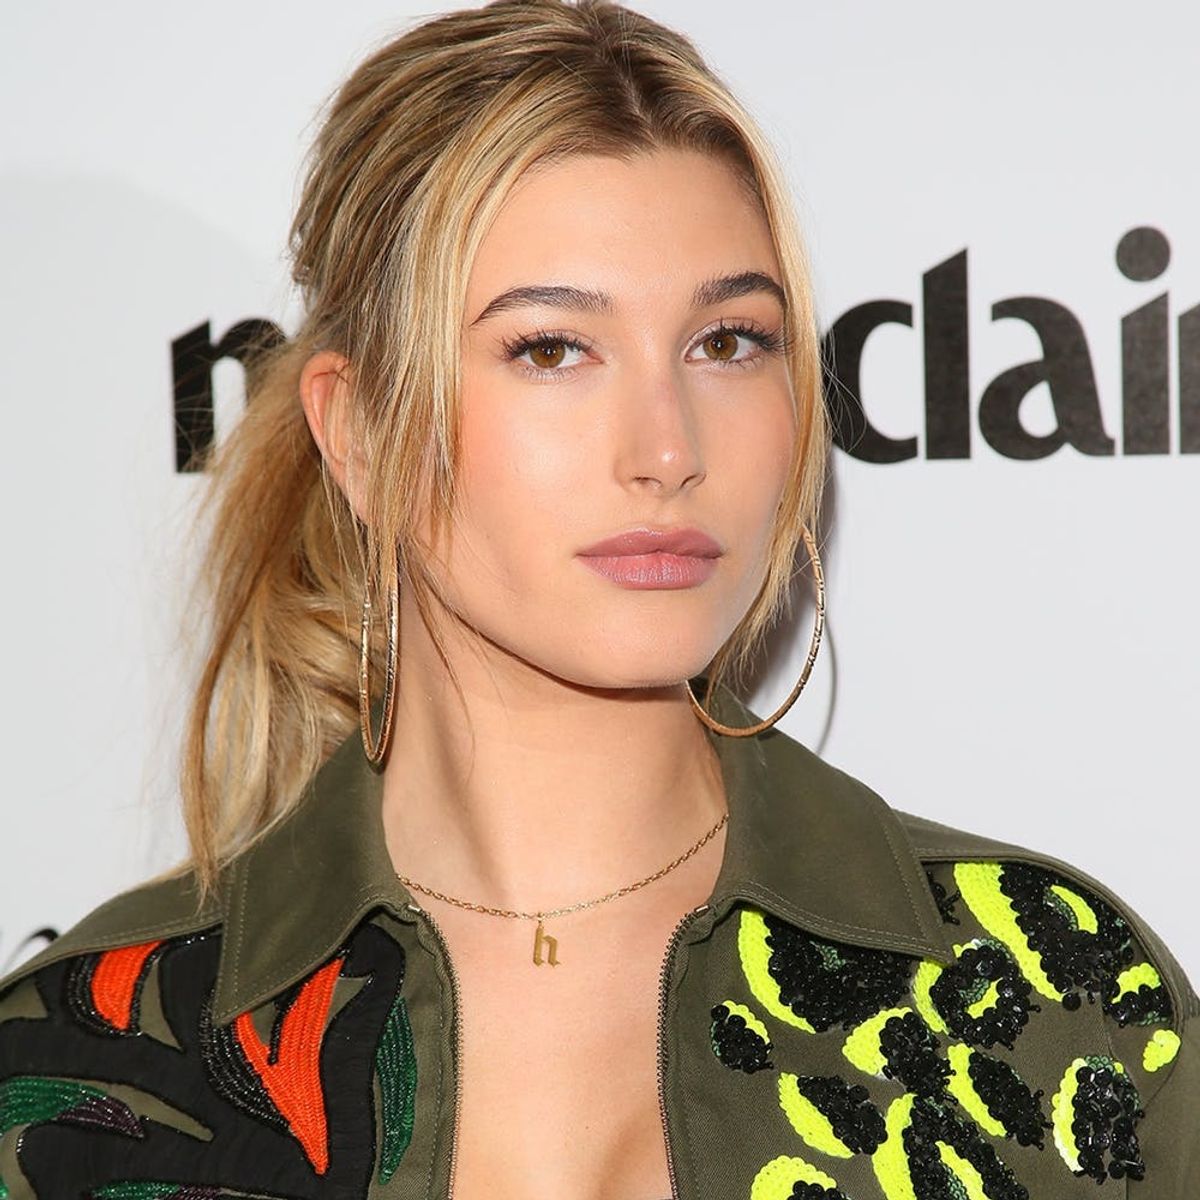 Hailey Baldwin’s New Hair Color Is a Total Game Changer